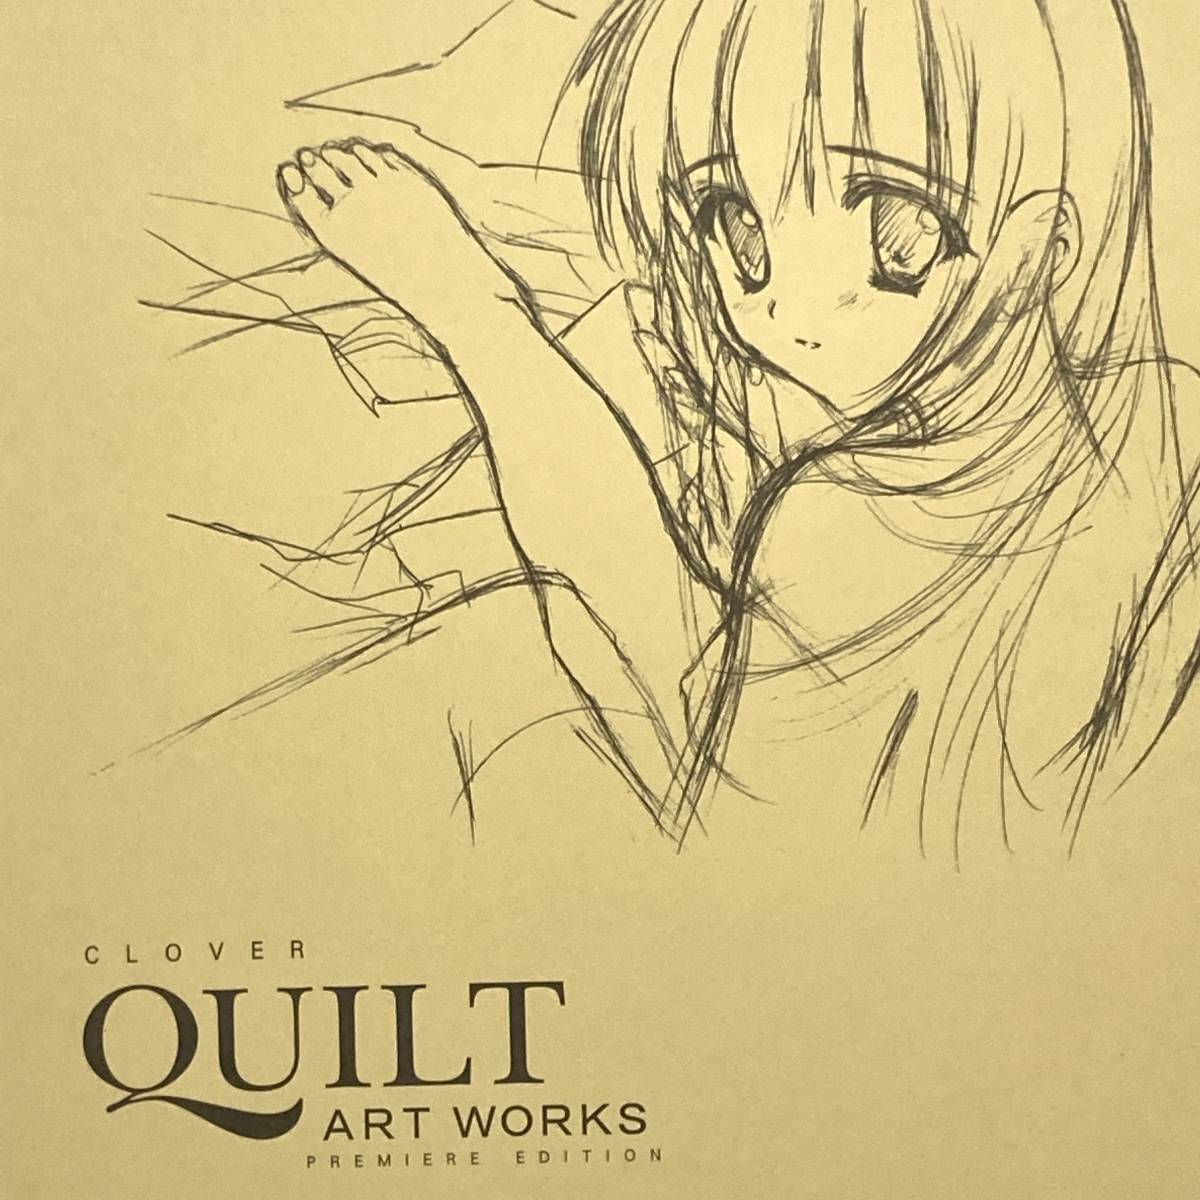 Clover Quilt Art Works Premiere Edition 小冊子 Carnelian すぎやま現象 西脇ゆぅり オービット クローバー キルト ラフイラスト集x2 Product Details Yahoo Auctions Japan Proxy Bidding And Shopping Service From Japan